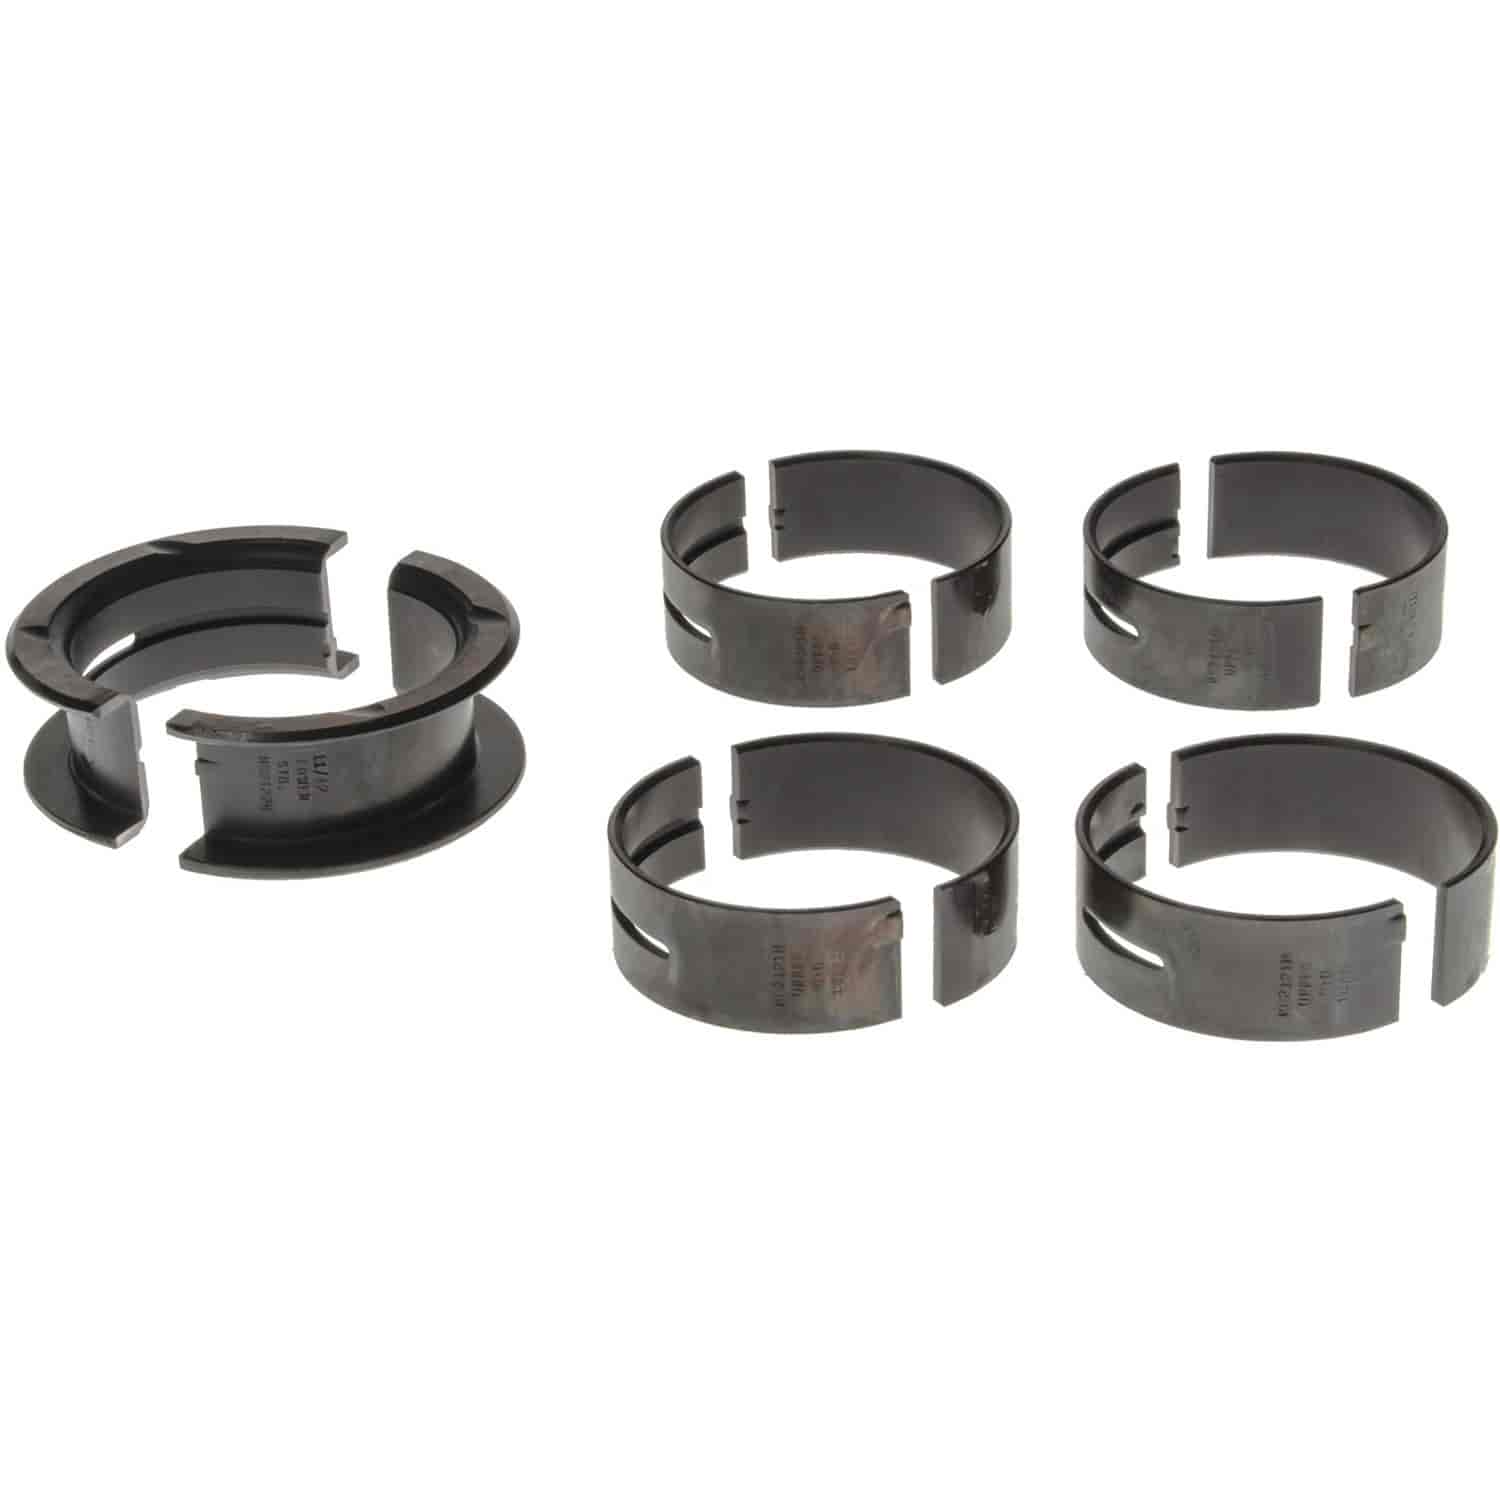 Main Bearing Set Ford 1962-2001 V8 221/255/260/289/302 (3.6/4.2/4.3/4.7/5.0L) with Standard Size